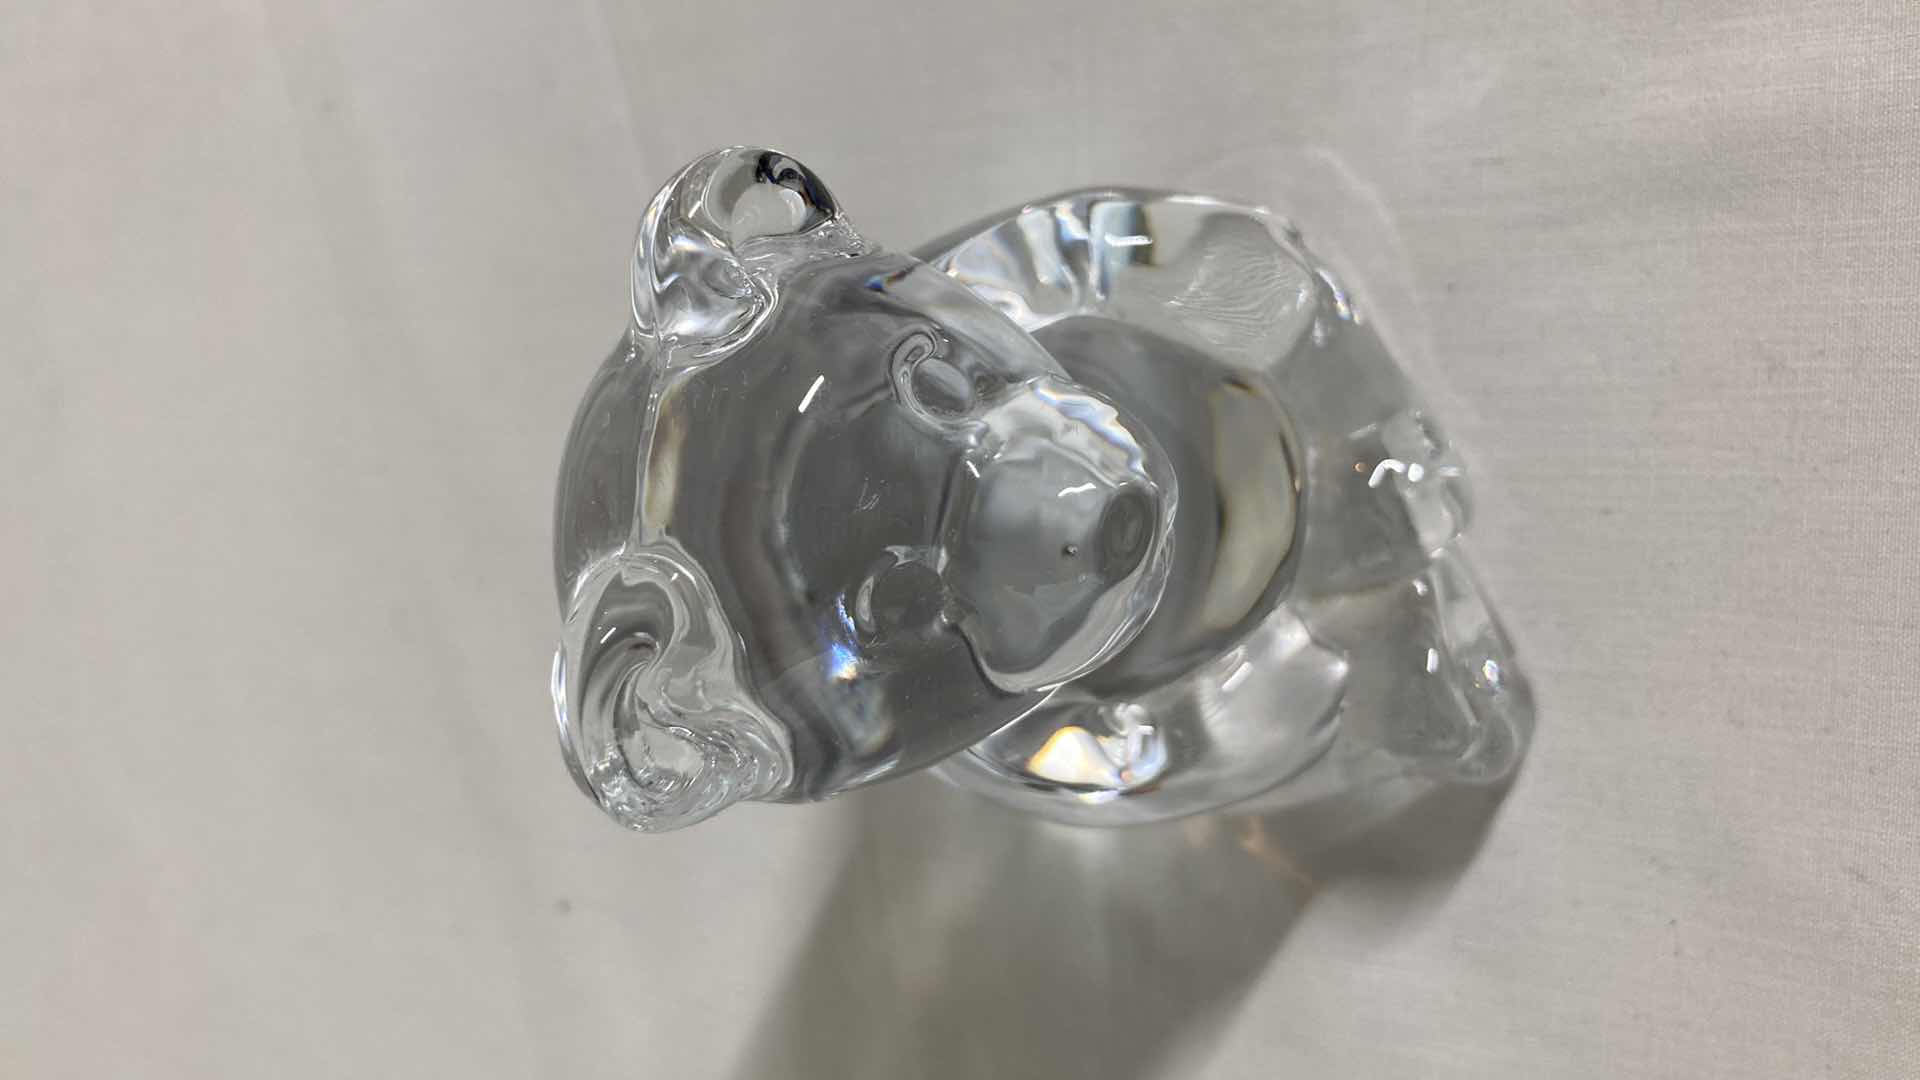 Photo 5 of BEAR CLEAR SOLID GLASS FIGURINE 2.25” X 3”